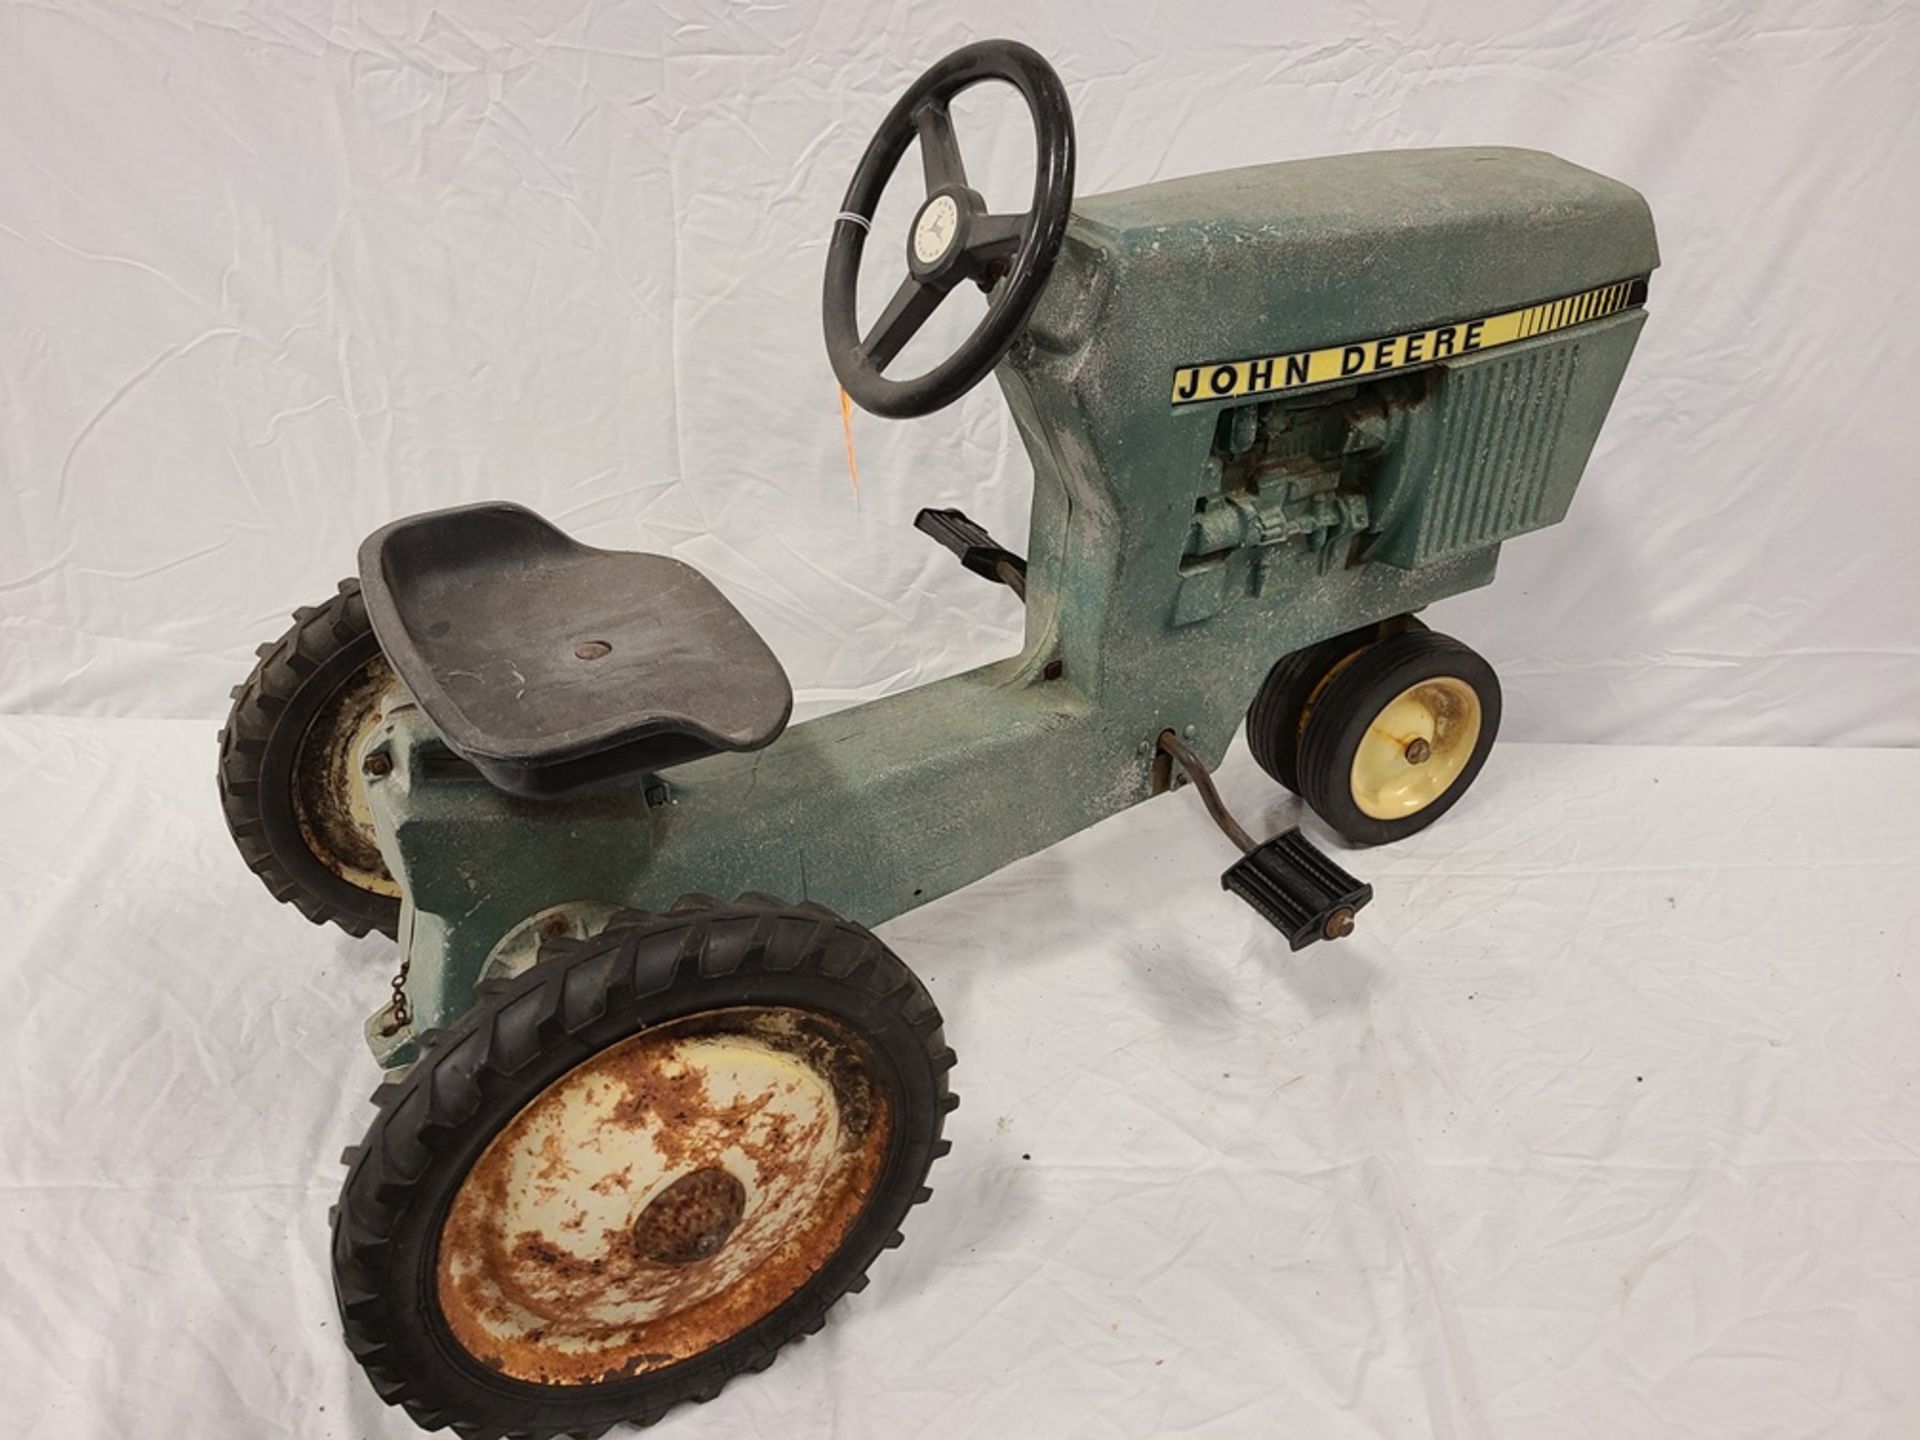 green "John Deere" tricycle pedal tractor - Image 2 of 2